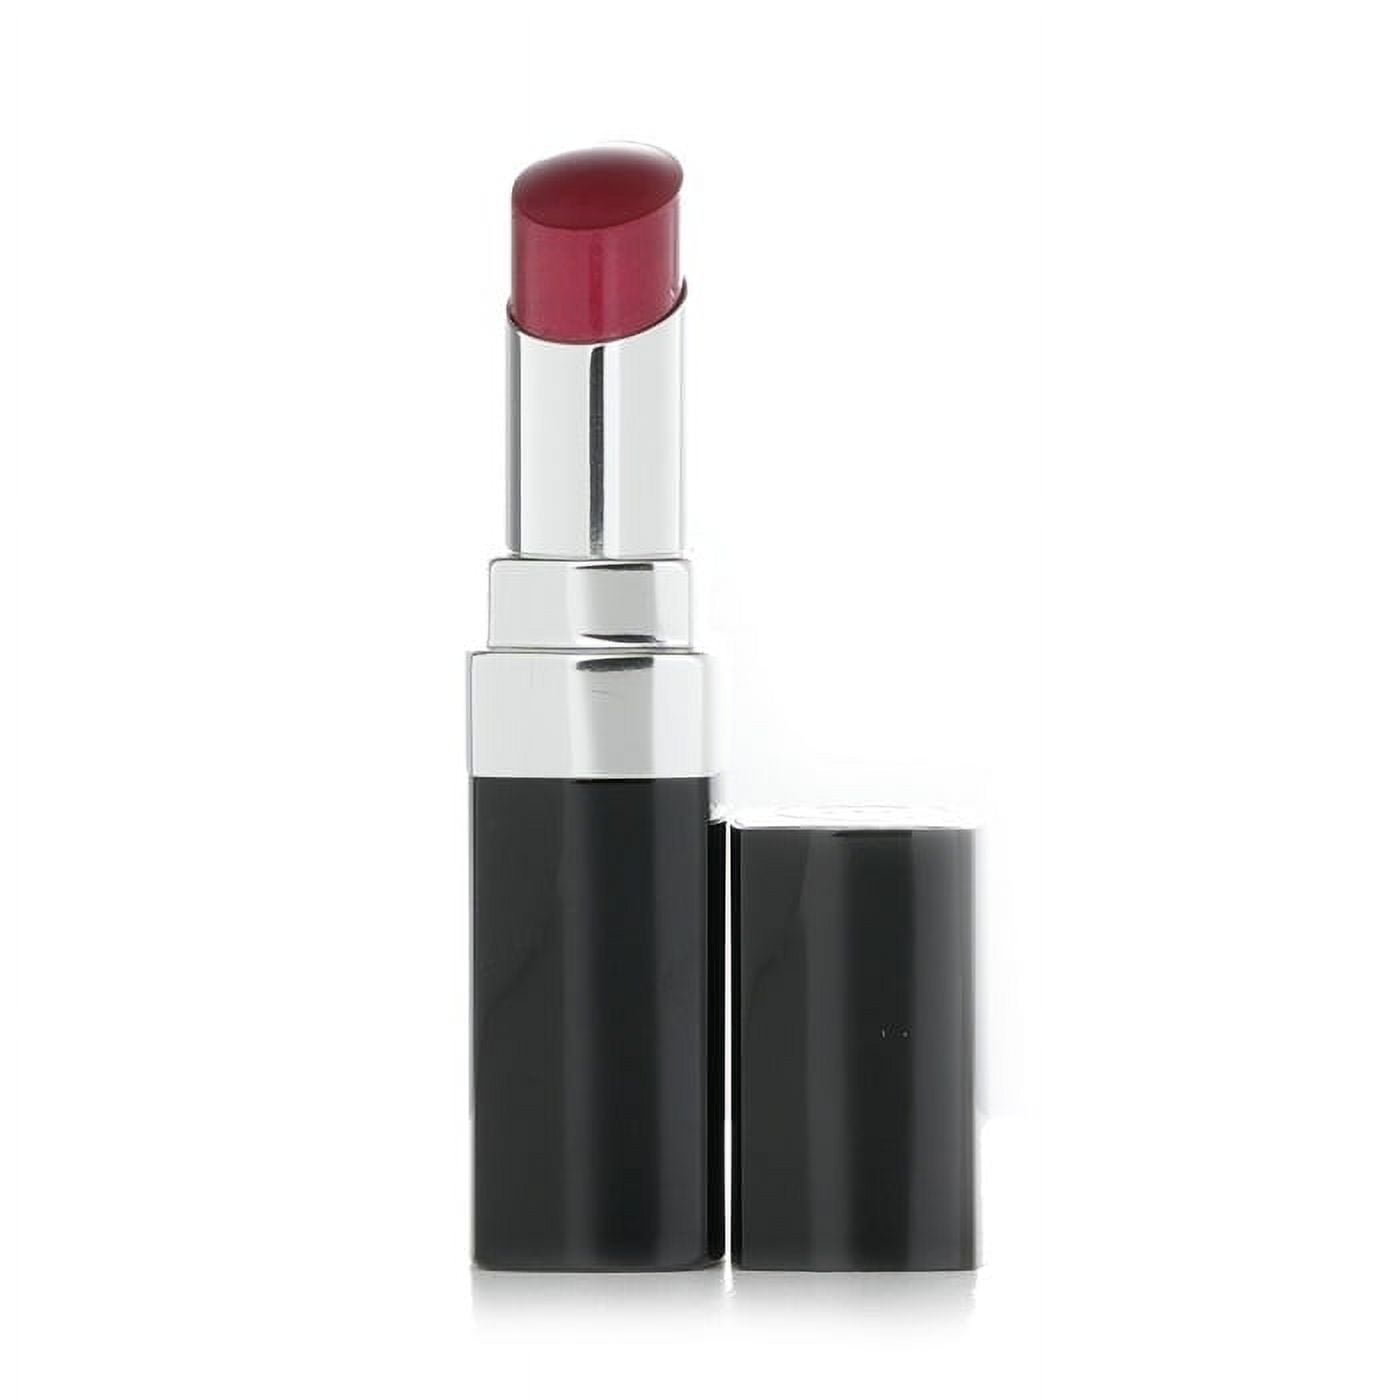 Chanel Rouge Coco Bloom Hydrating Plumping Intense Shine Lip Colour - # 142  Burst 3g/0.1oz